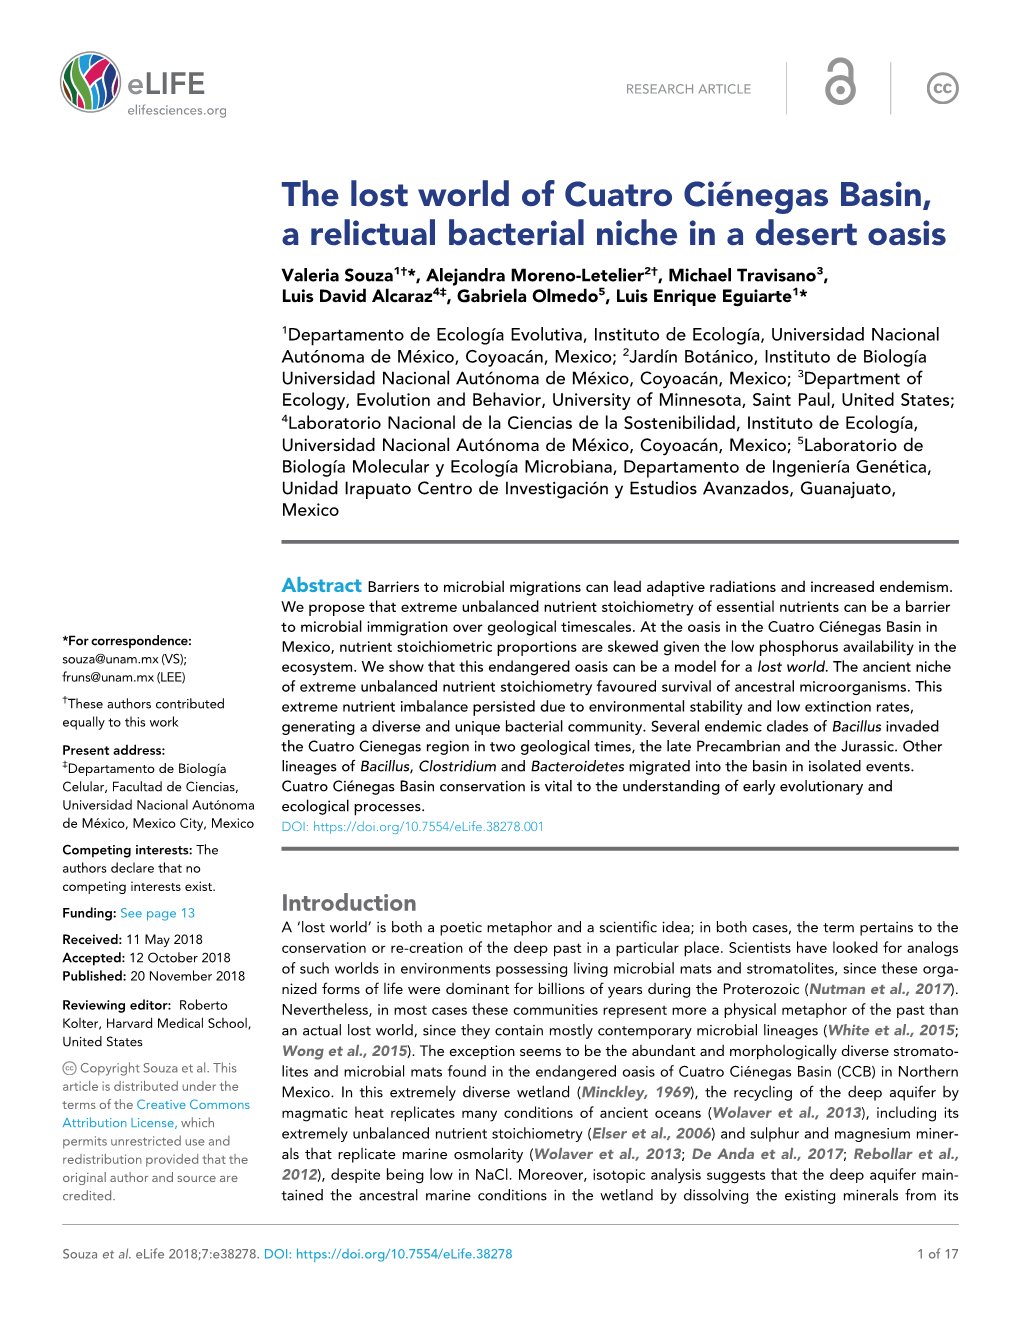 The Lost World of Cuatro Cie´ Negas Basin, a Relictual Bacterial Niche In